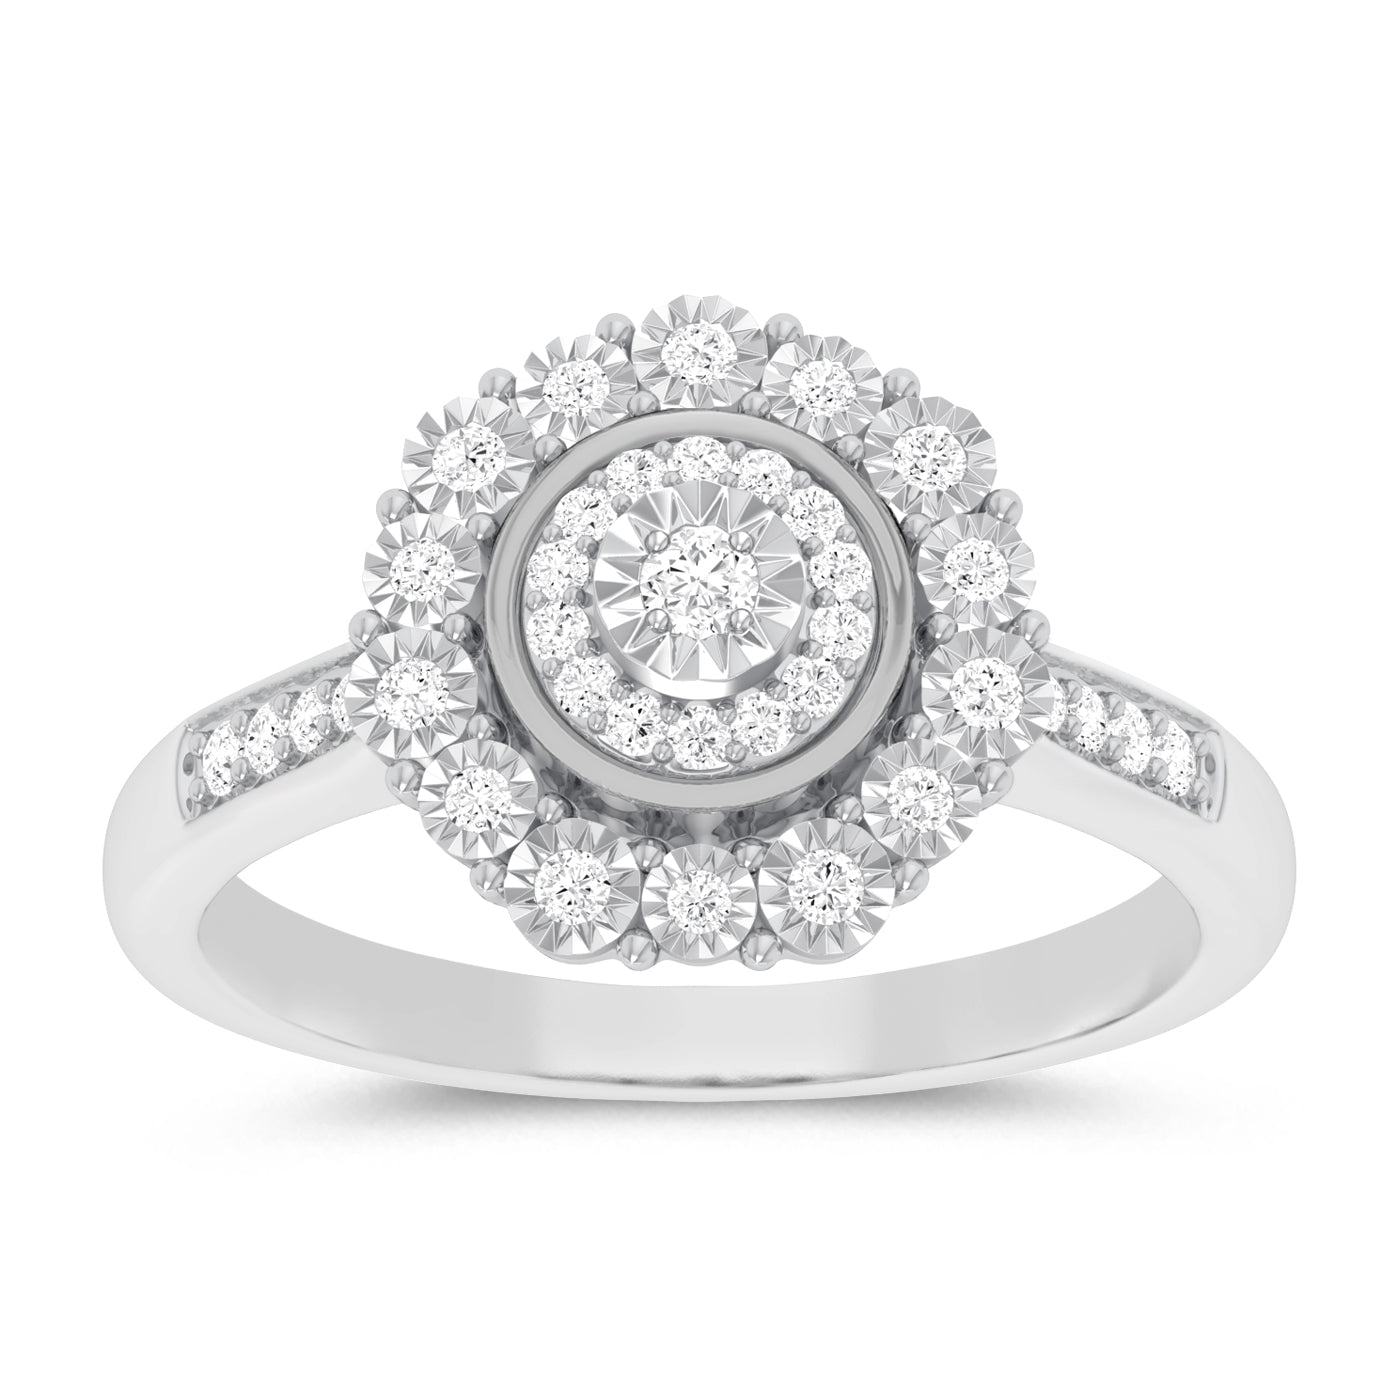 Miracle Little Halo Ring with 0.15ct of Diamonds in Sterling Silver Rings Bevilles 